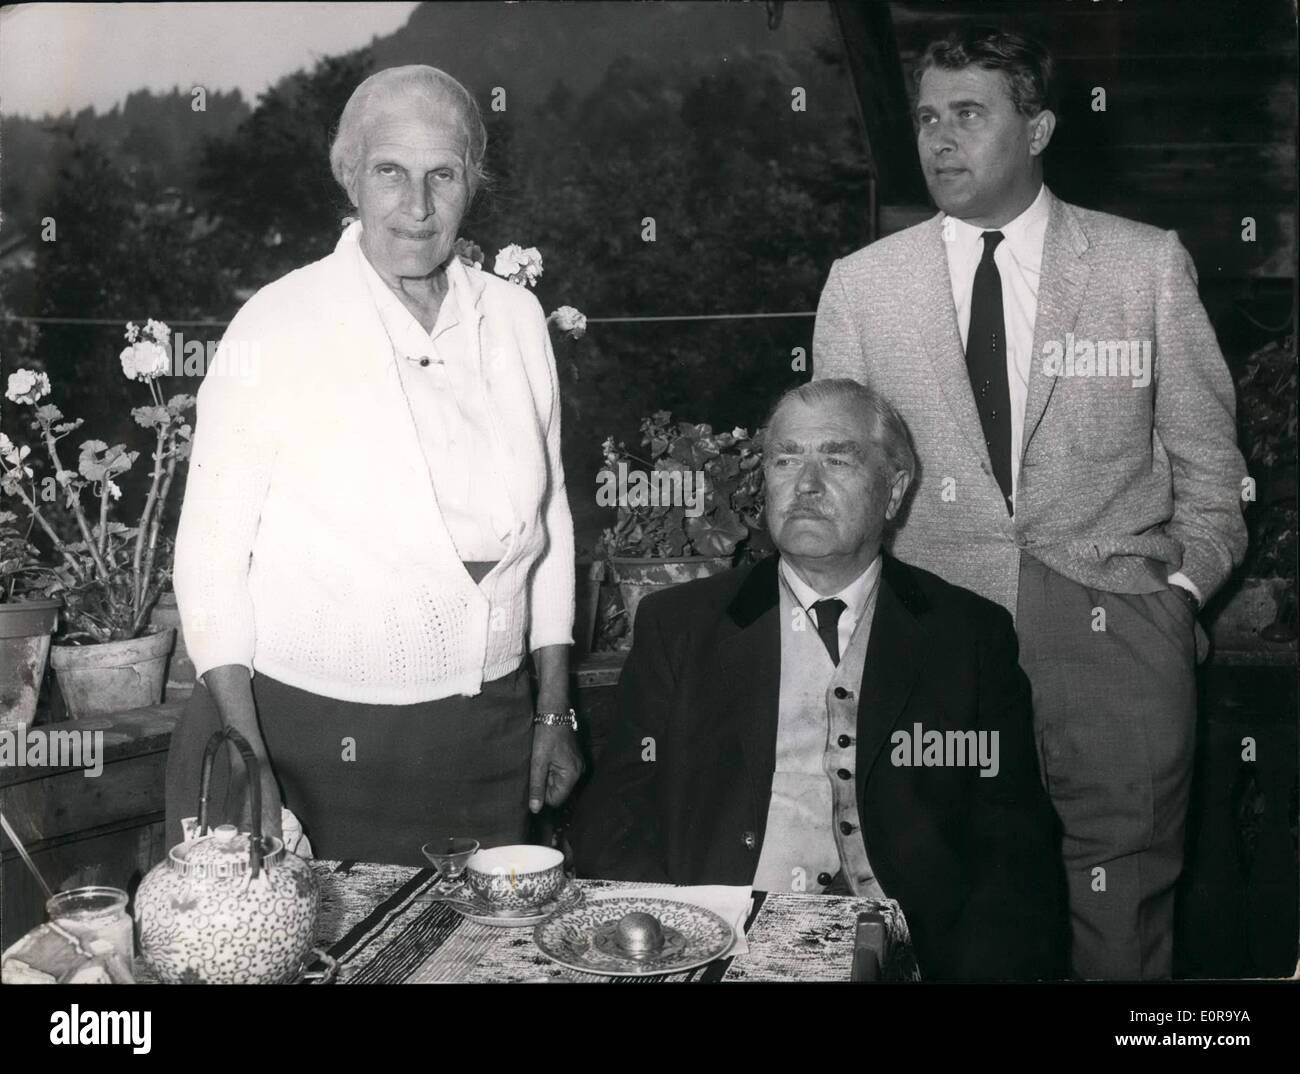 Sep. 09, 1958 - The Rocket specialist Wernher Von Braun: Spends some days of recreation with his parents in the Bavarian village Oberaudorf. During the Astronautic congress in Amsterdam he was not quite well so he decided to use his short stay in Europe to visit his parents. Picture Shows: F.l.t.r. baroness Von Braun. baron Magnus Von Braun and Dr. Wernher Von Braun on the Balkon of his parent's house in Oberaudorf. Stock Photo